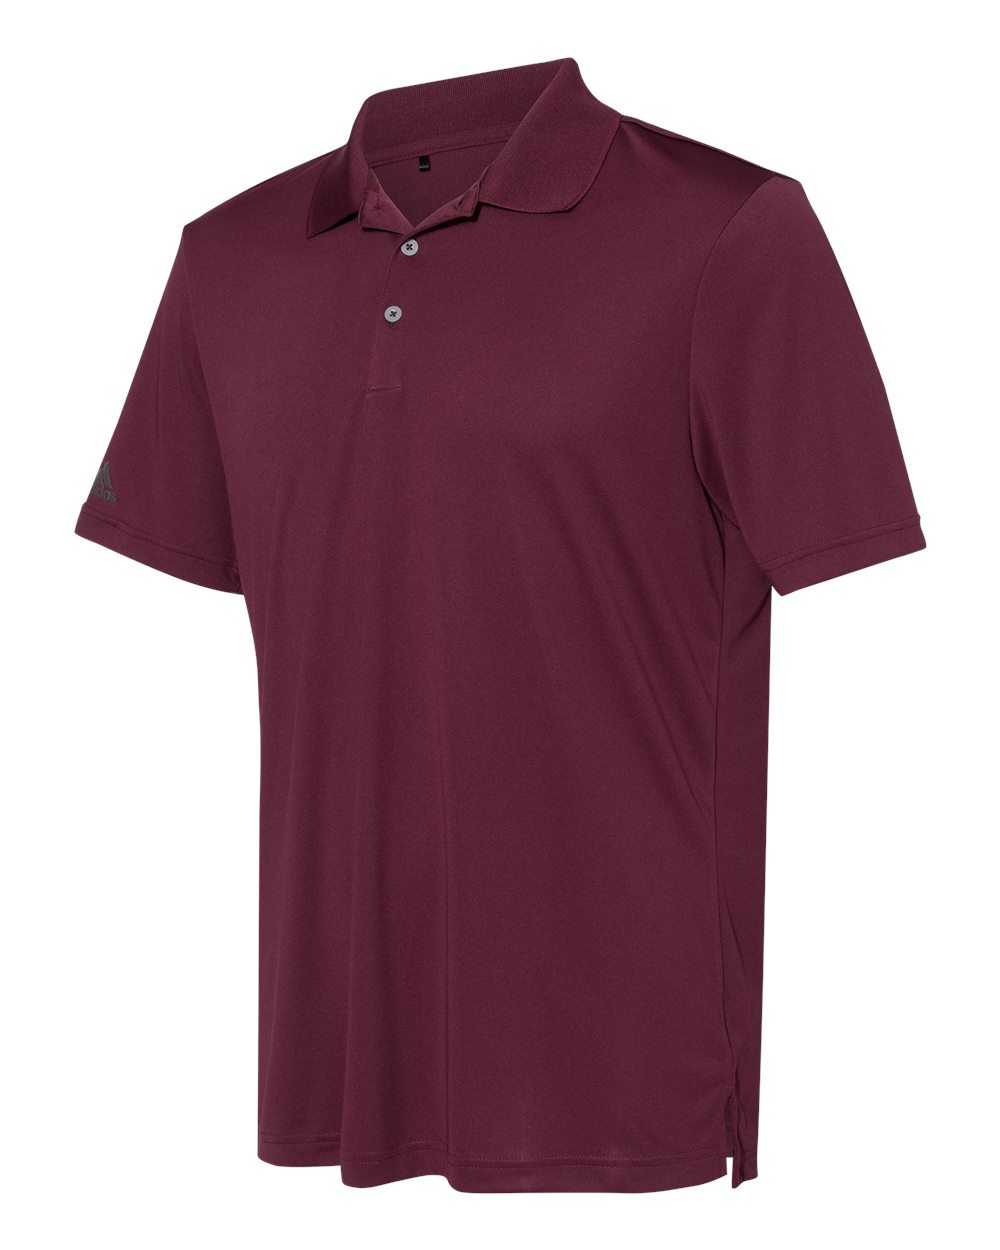 Adidas A230 Performance Sport Shirt - Maroon - HIT a Double